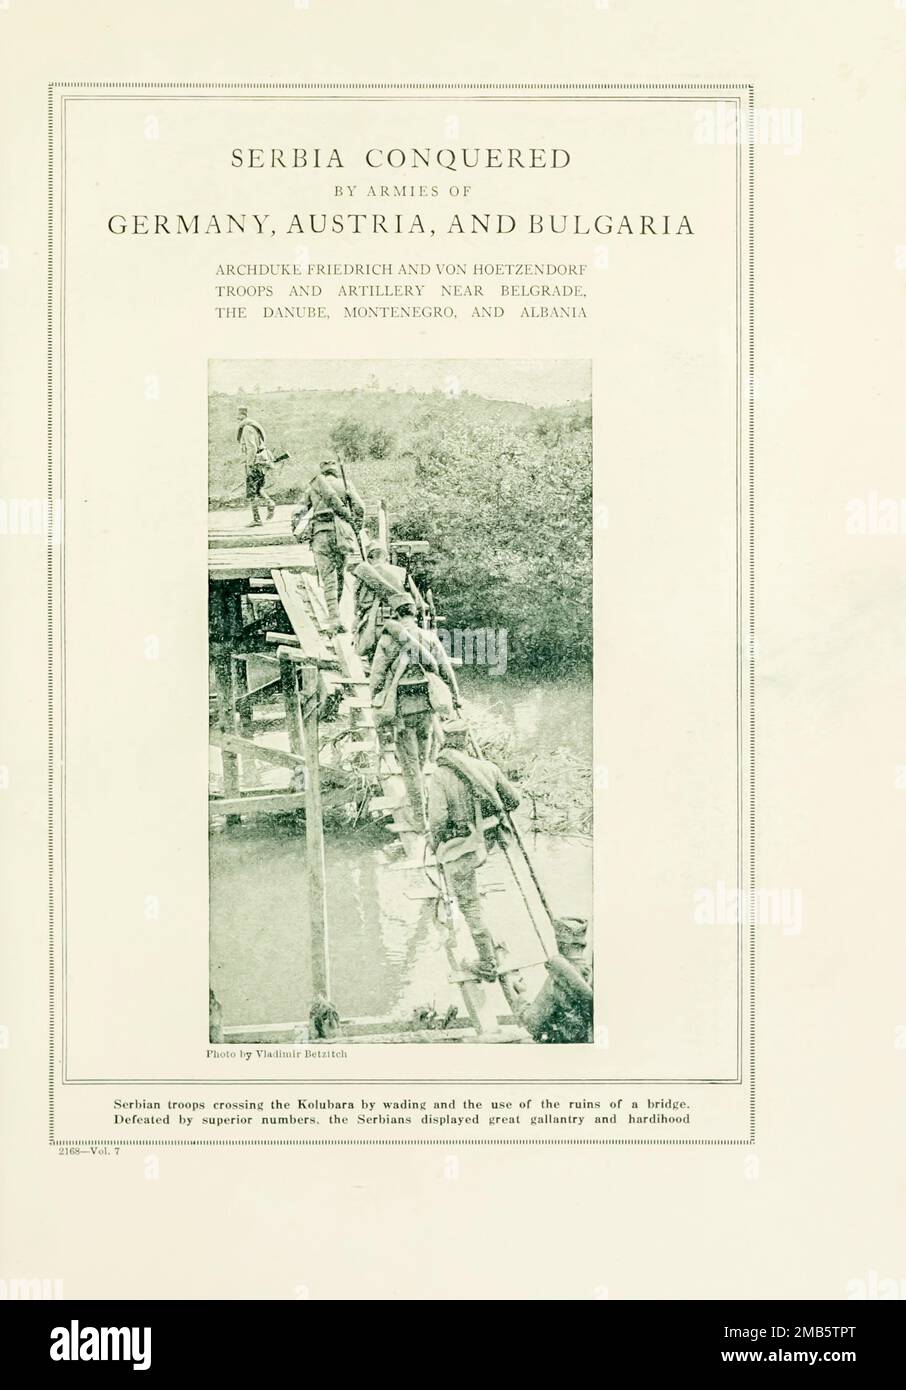 Retreating Serbian Soldiers Crossing a Wrecked Bridge from the book The story of the great war; the complete historical records of events to date DIPLOMATIC AND STATE PAPERS by Reynolds, Francis Joseph, 1867-1937; Churchill, Allen Leon; Miller, Francis Trevelyan, 1877-1959; Wood, Leonard, 1860-1927; Knight, Austin Melvin, 1854-1927; Palmer, Frederick, 1873-1958; Simonds, Frank Herbert, 1878-; Ruhl, Arthur Brown, 1876-  Volume VII Published 1920 Stock Photo